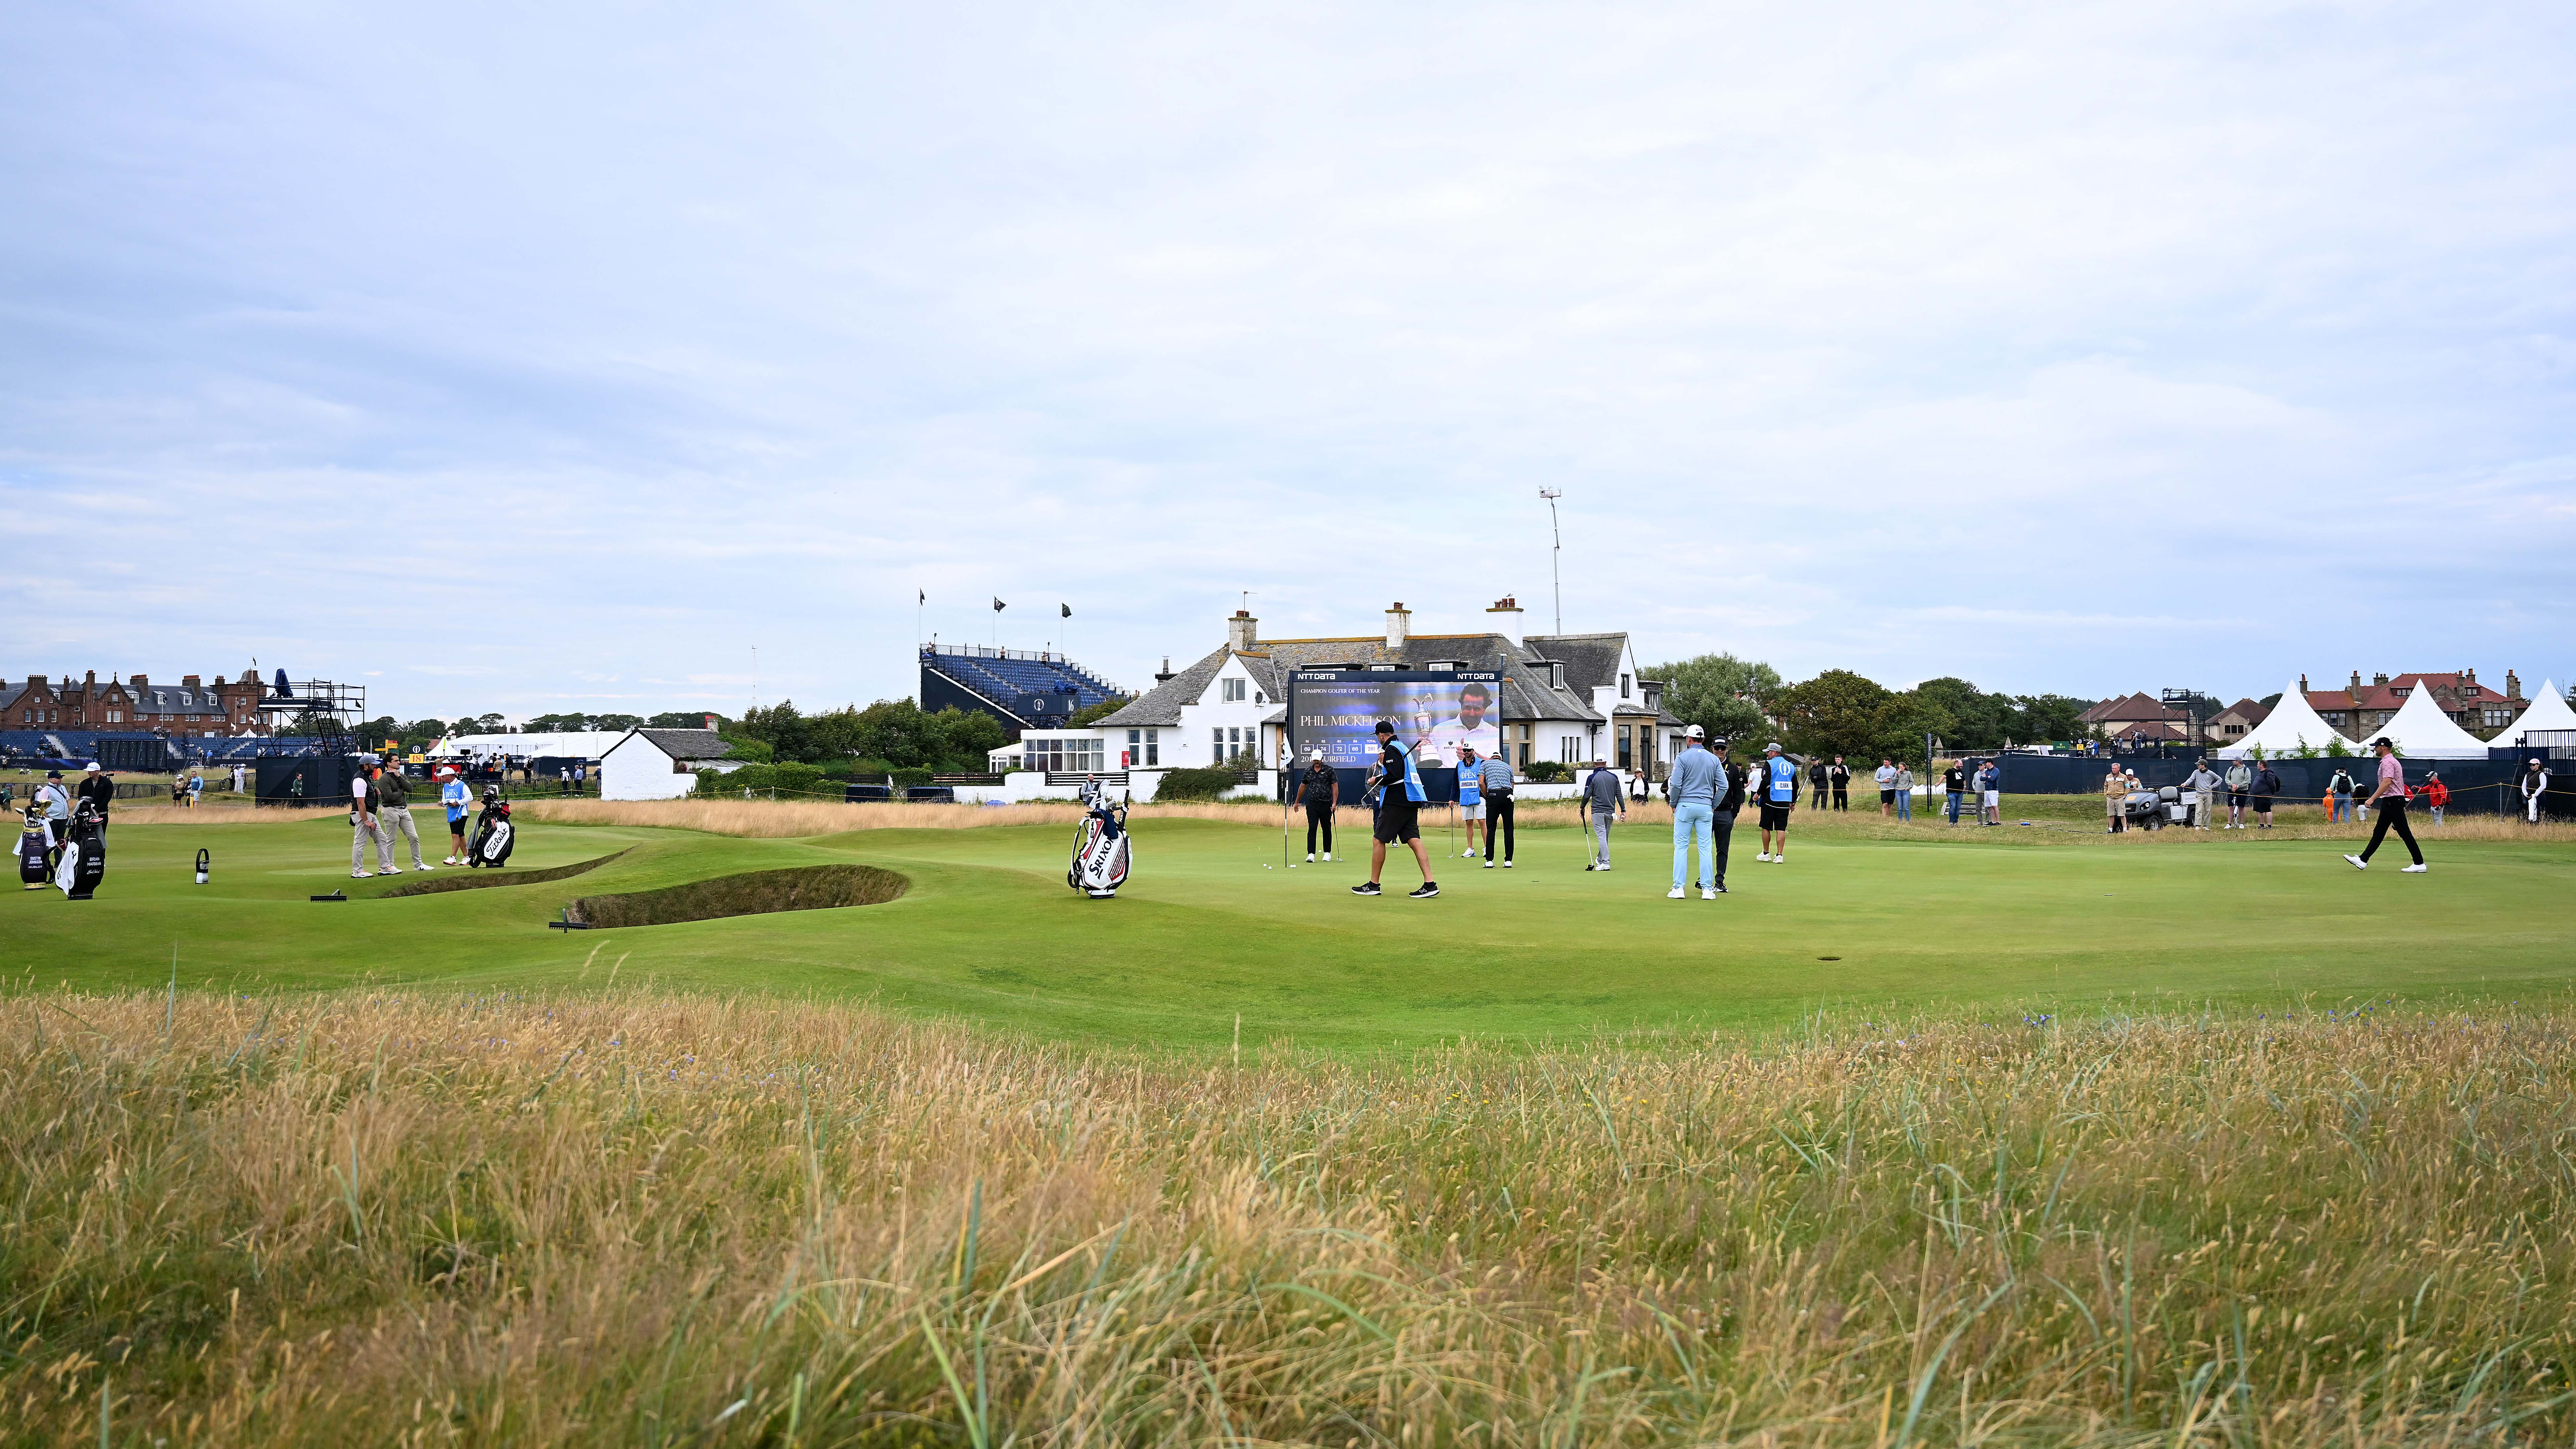 Open Championship prize money includes record purse, $3.1M payout for winner